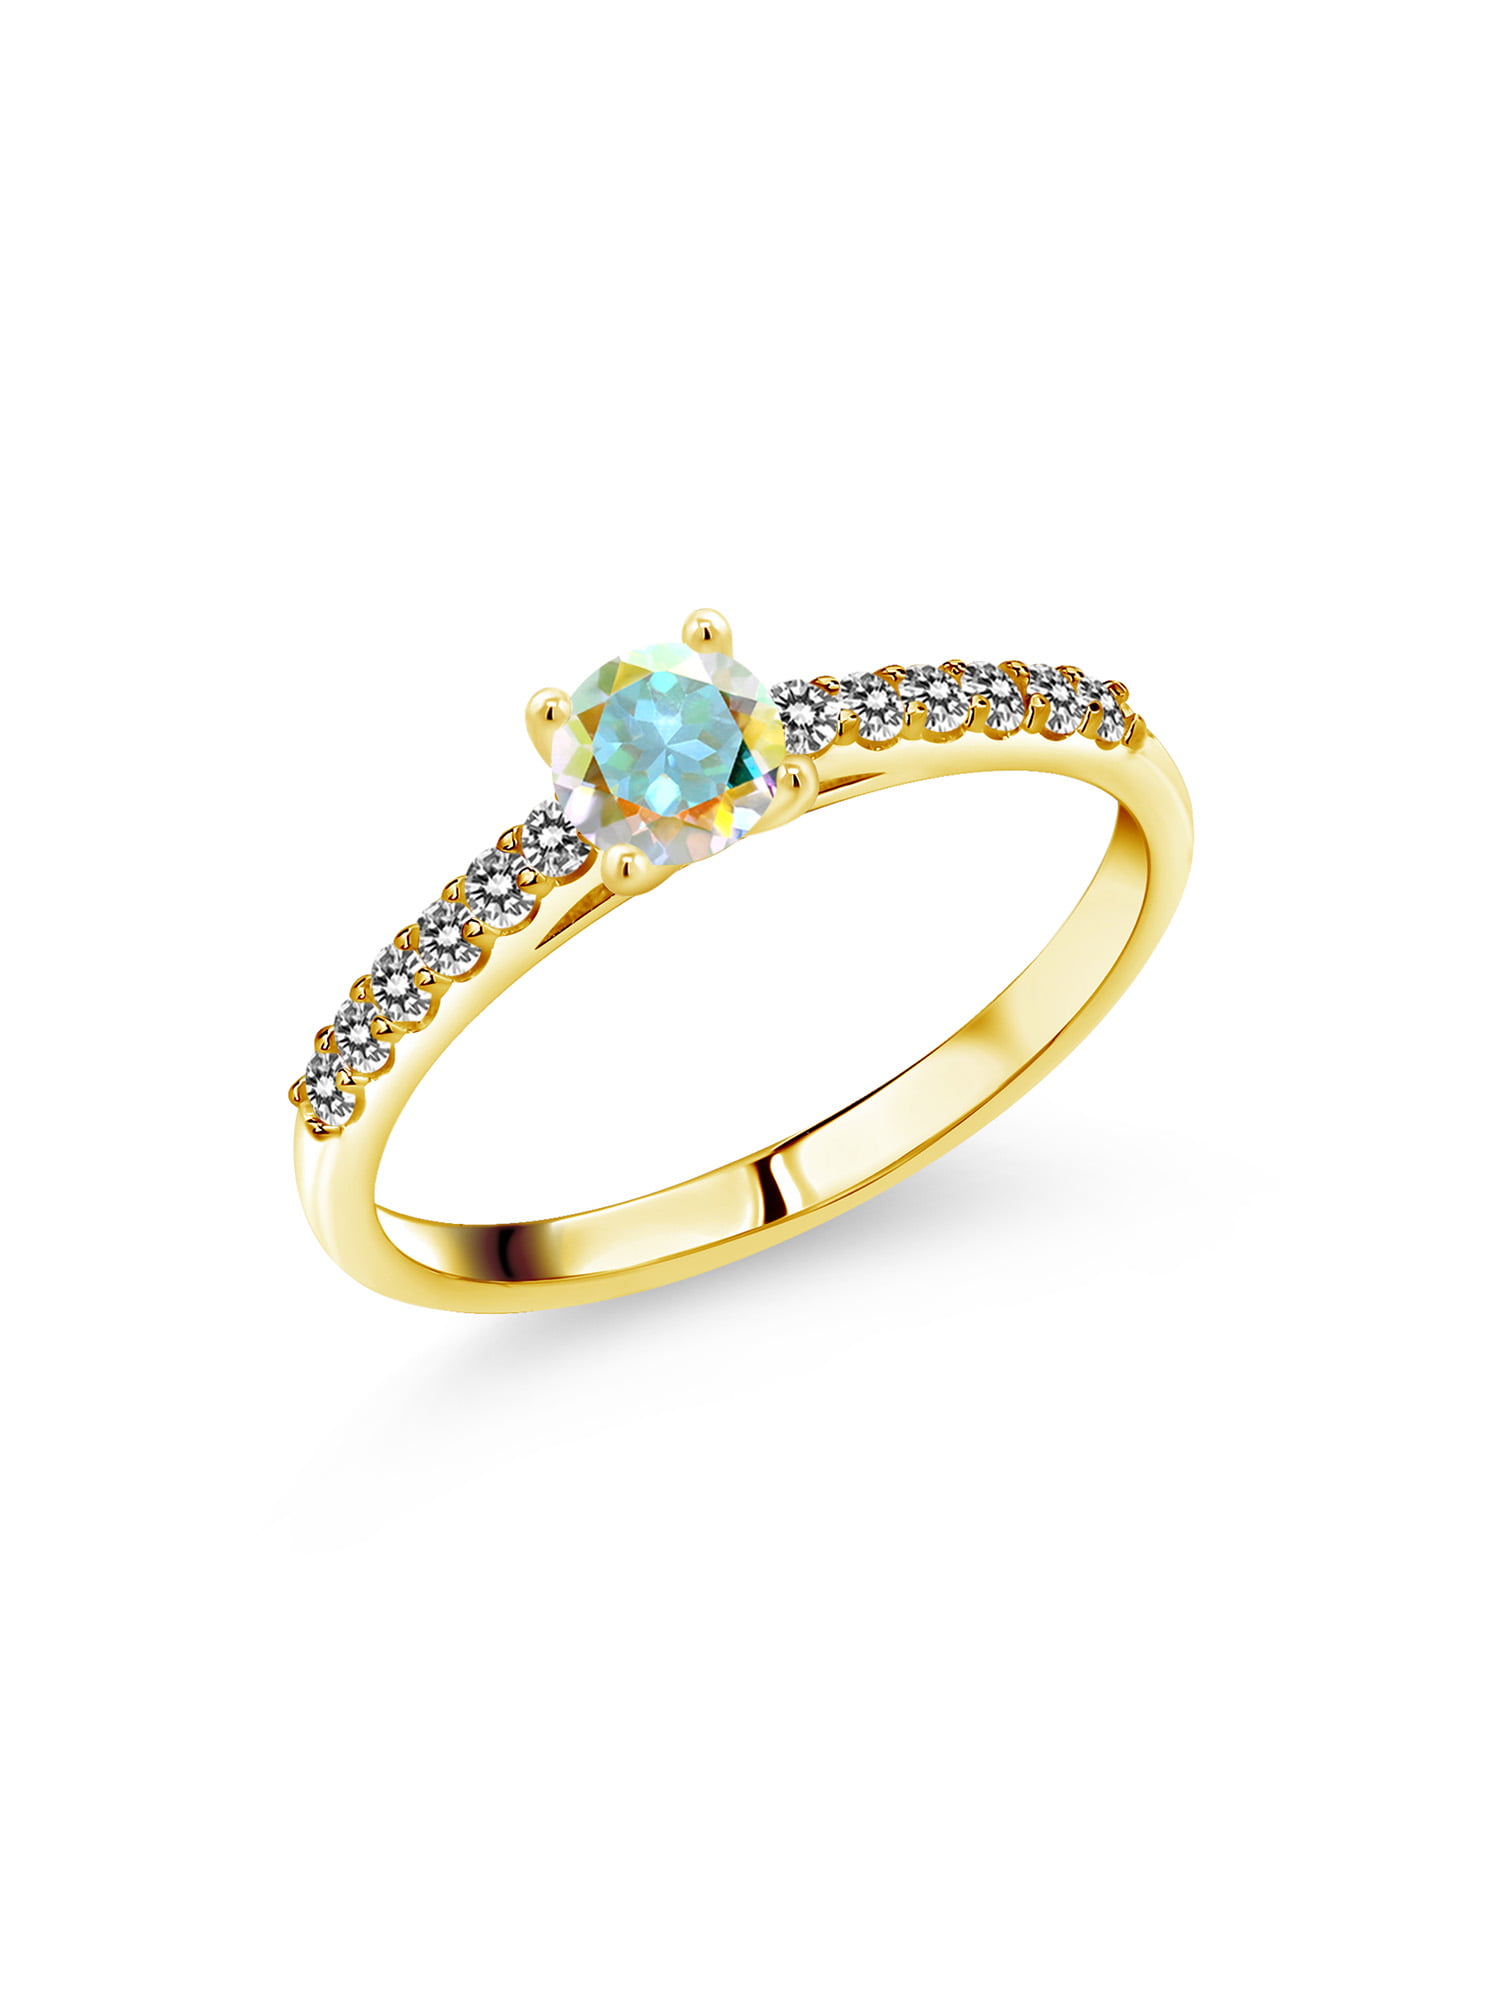 0.75 Ct Round, Gemstone Birthstone, Available 5,6,7,8,9 Gem Stone King 10K Rose Gold London Blue Topaz Women's Solitaire Ring 